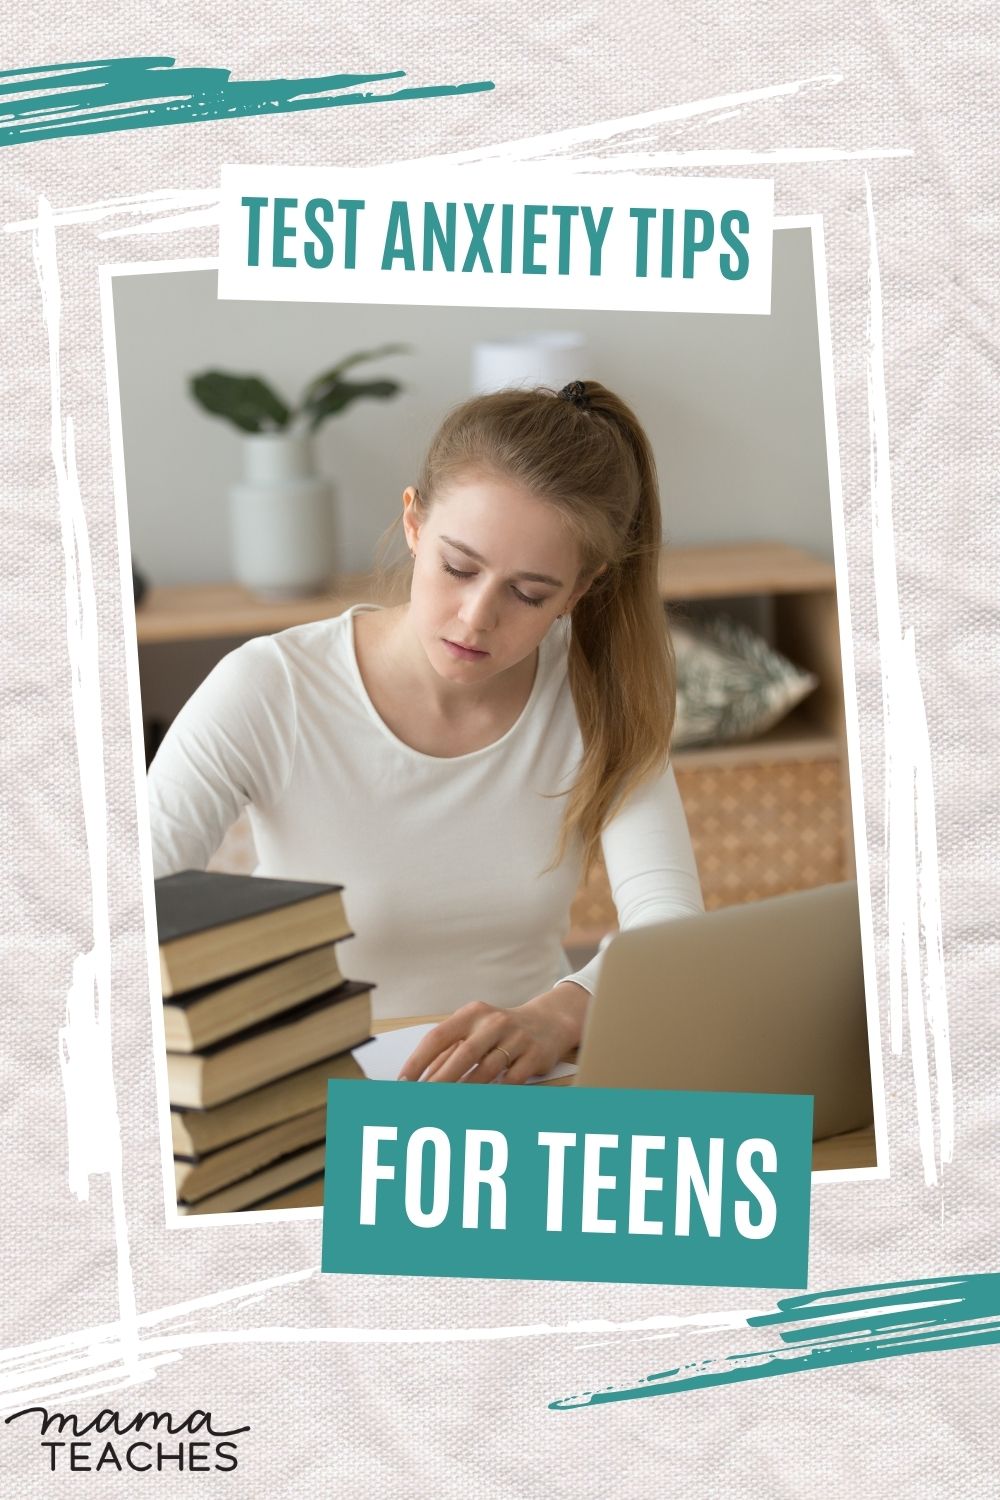 Test Anxiety Tips for Teens